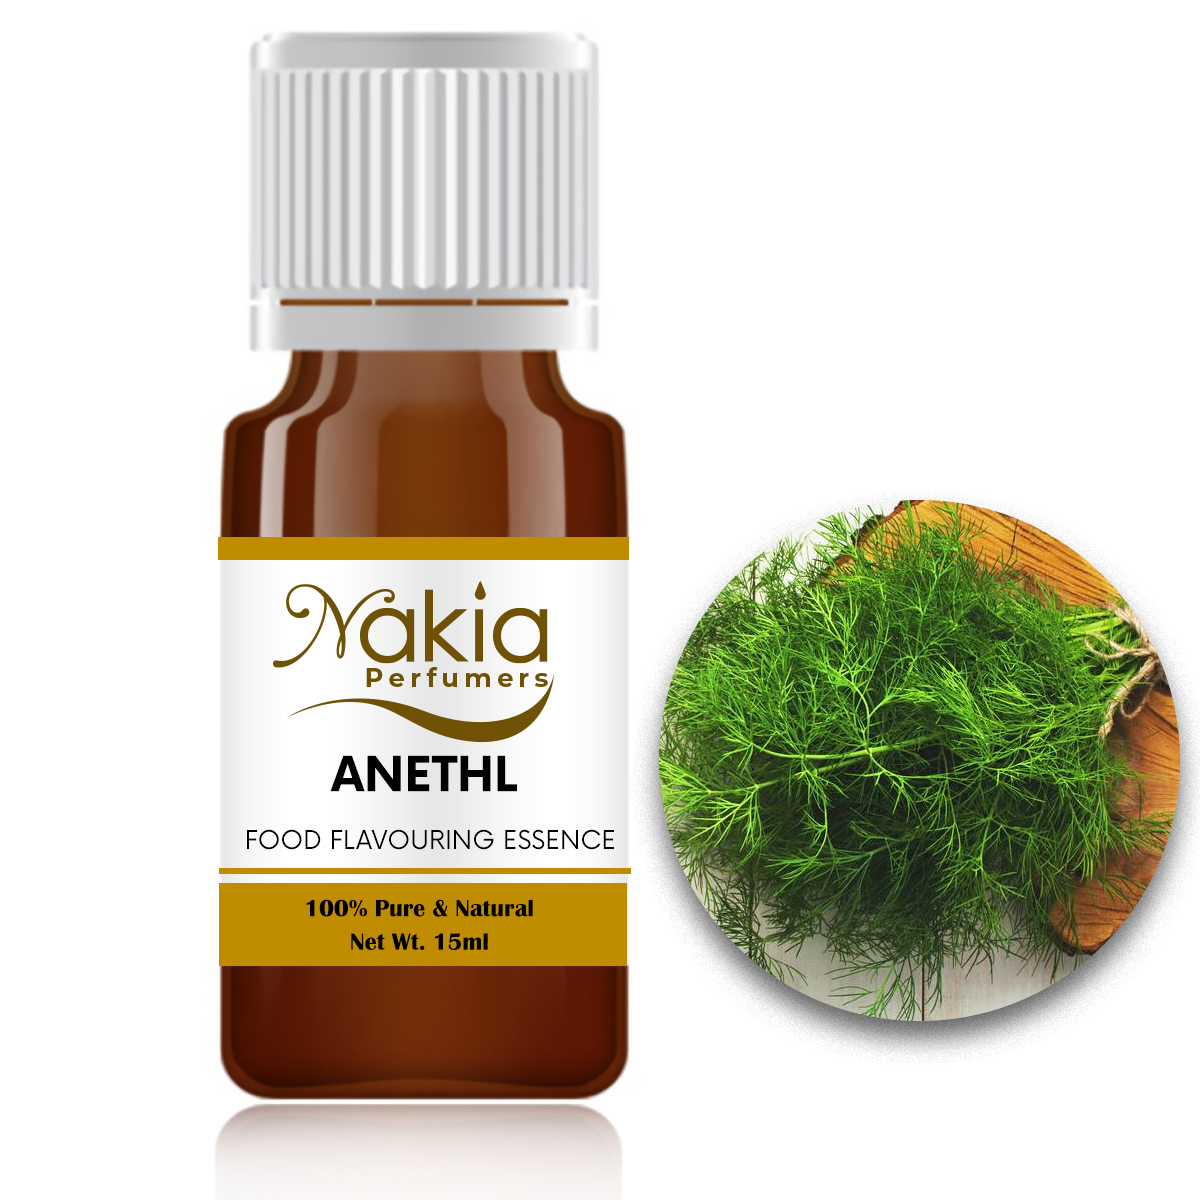 ANETHL FOOD FLAVOURING ESSENCE